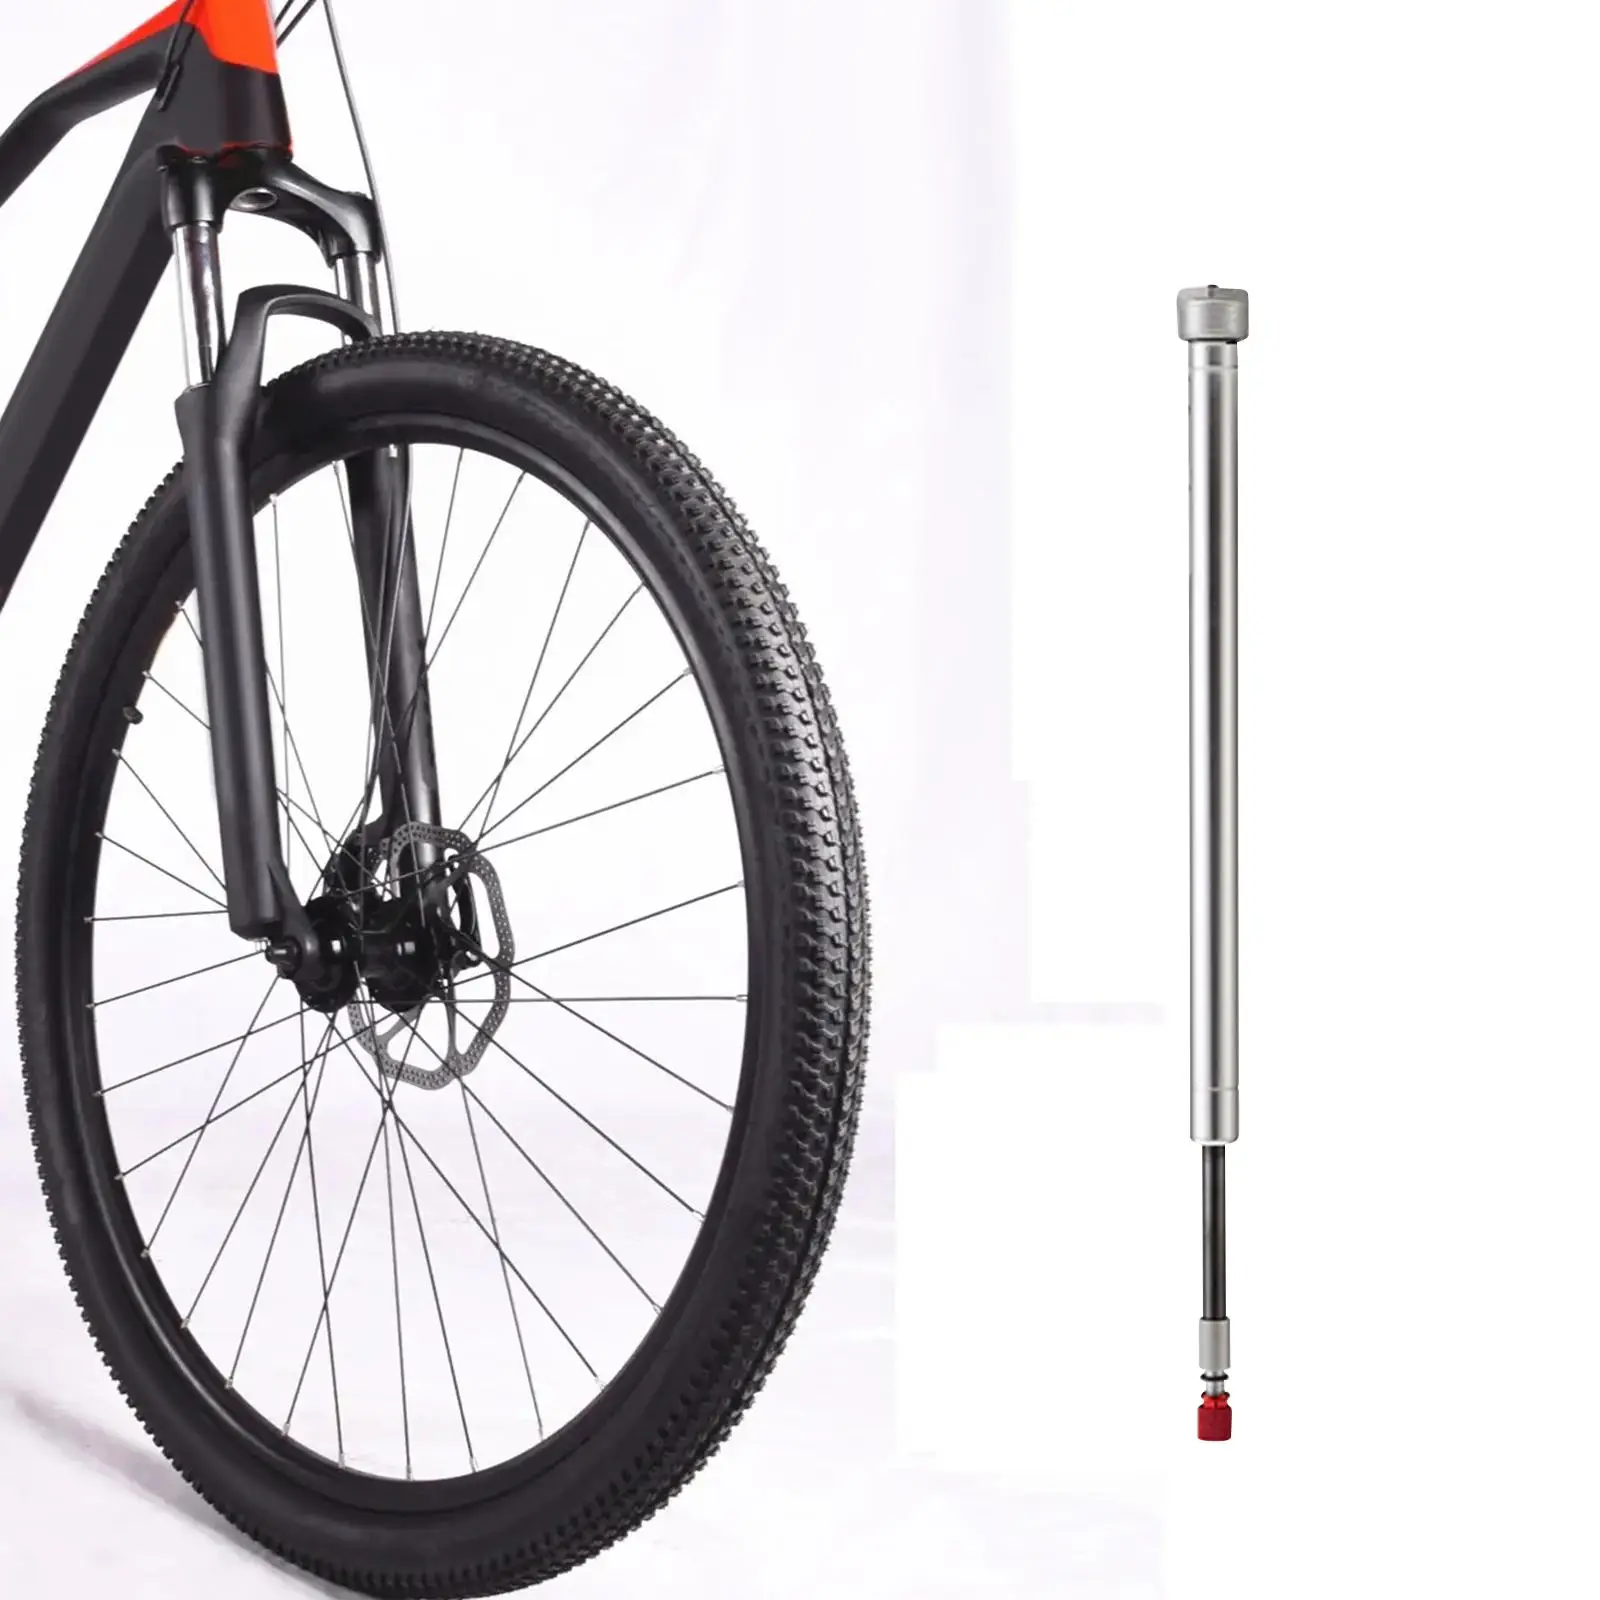 Front Fork Repair Rod Shoulder Control 32mm Durable Easy Installation Accessories Air Pneumatic Rod for Mountain Bike